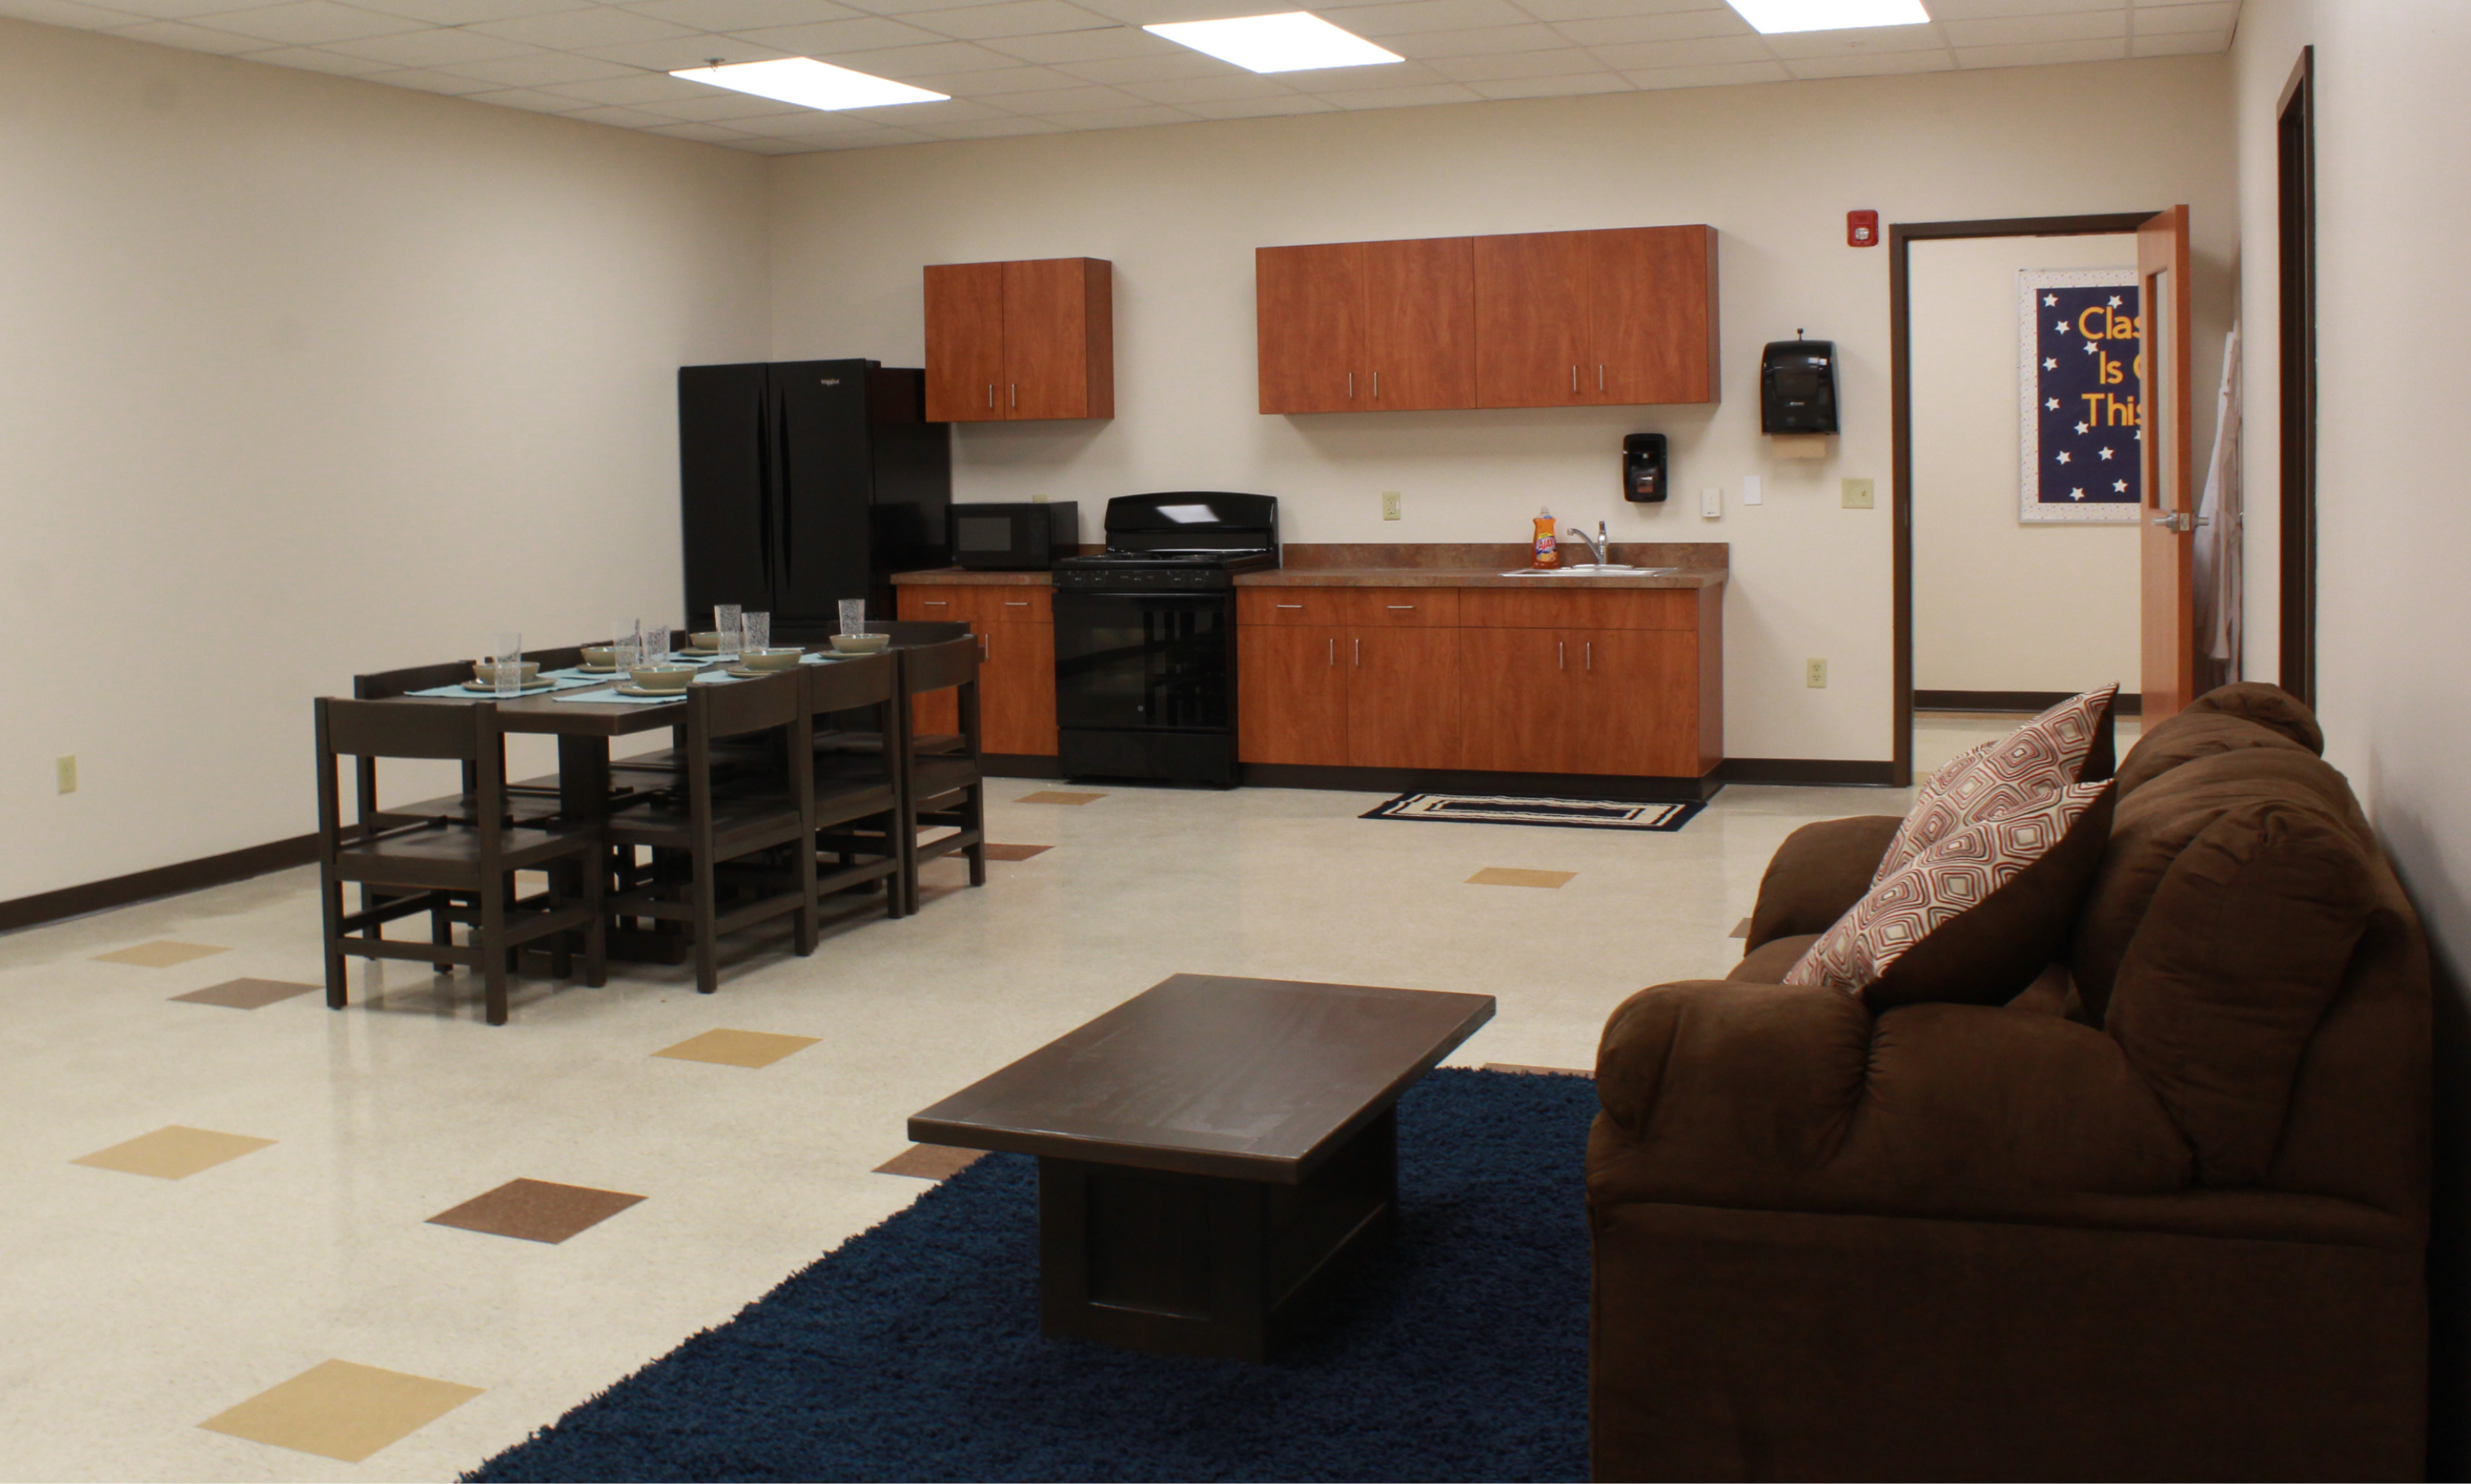 New Story Schools in Carlisle Life Skills Room, a basic kitchenette, table and couch. 